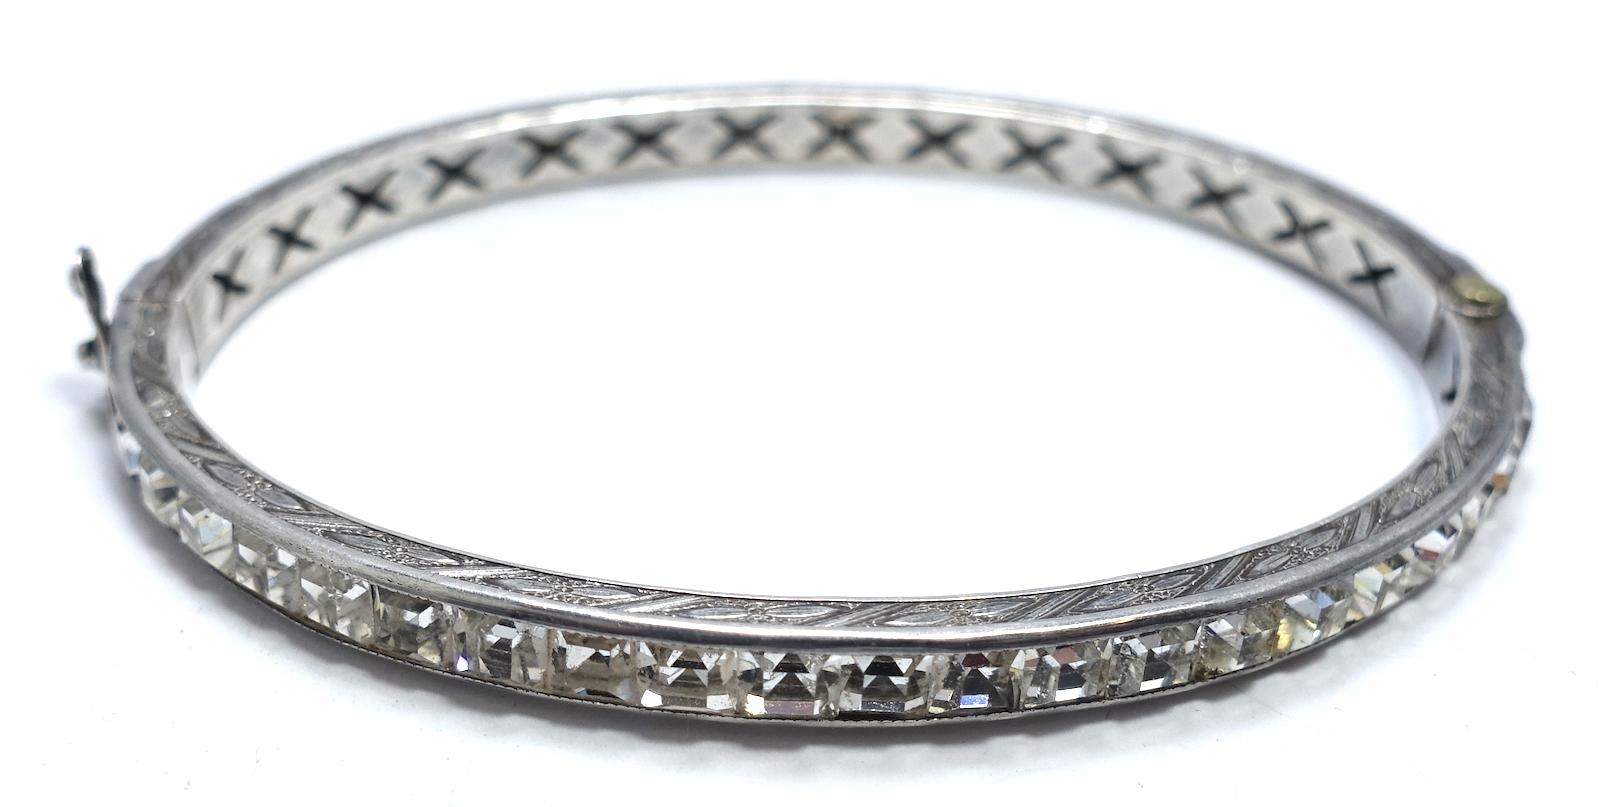 This vintage Art Deco 1930s bracelet features clear crystals in a sterling silver setting.  In excellent condition, this bracelet measures 7” x 3-1/6” with a slide in clasp and safety clip.